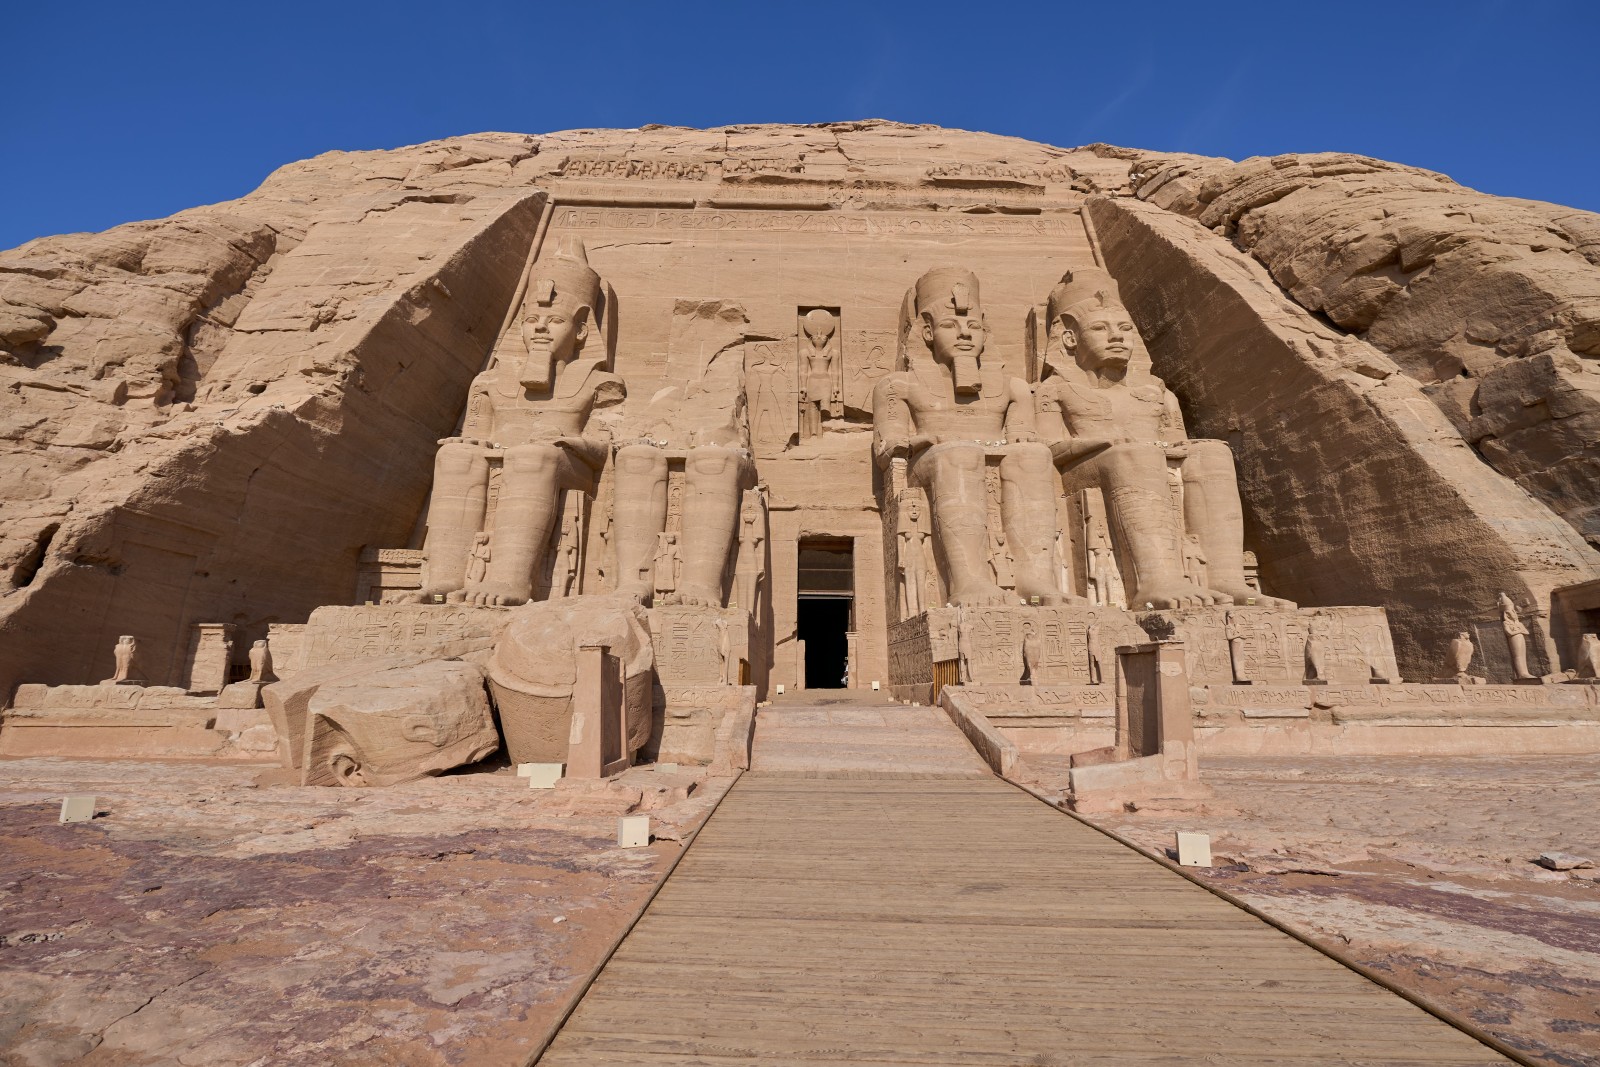 Large carvings in the side of a mountain with blue skies during daytime